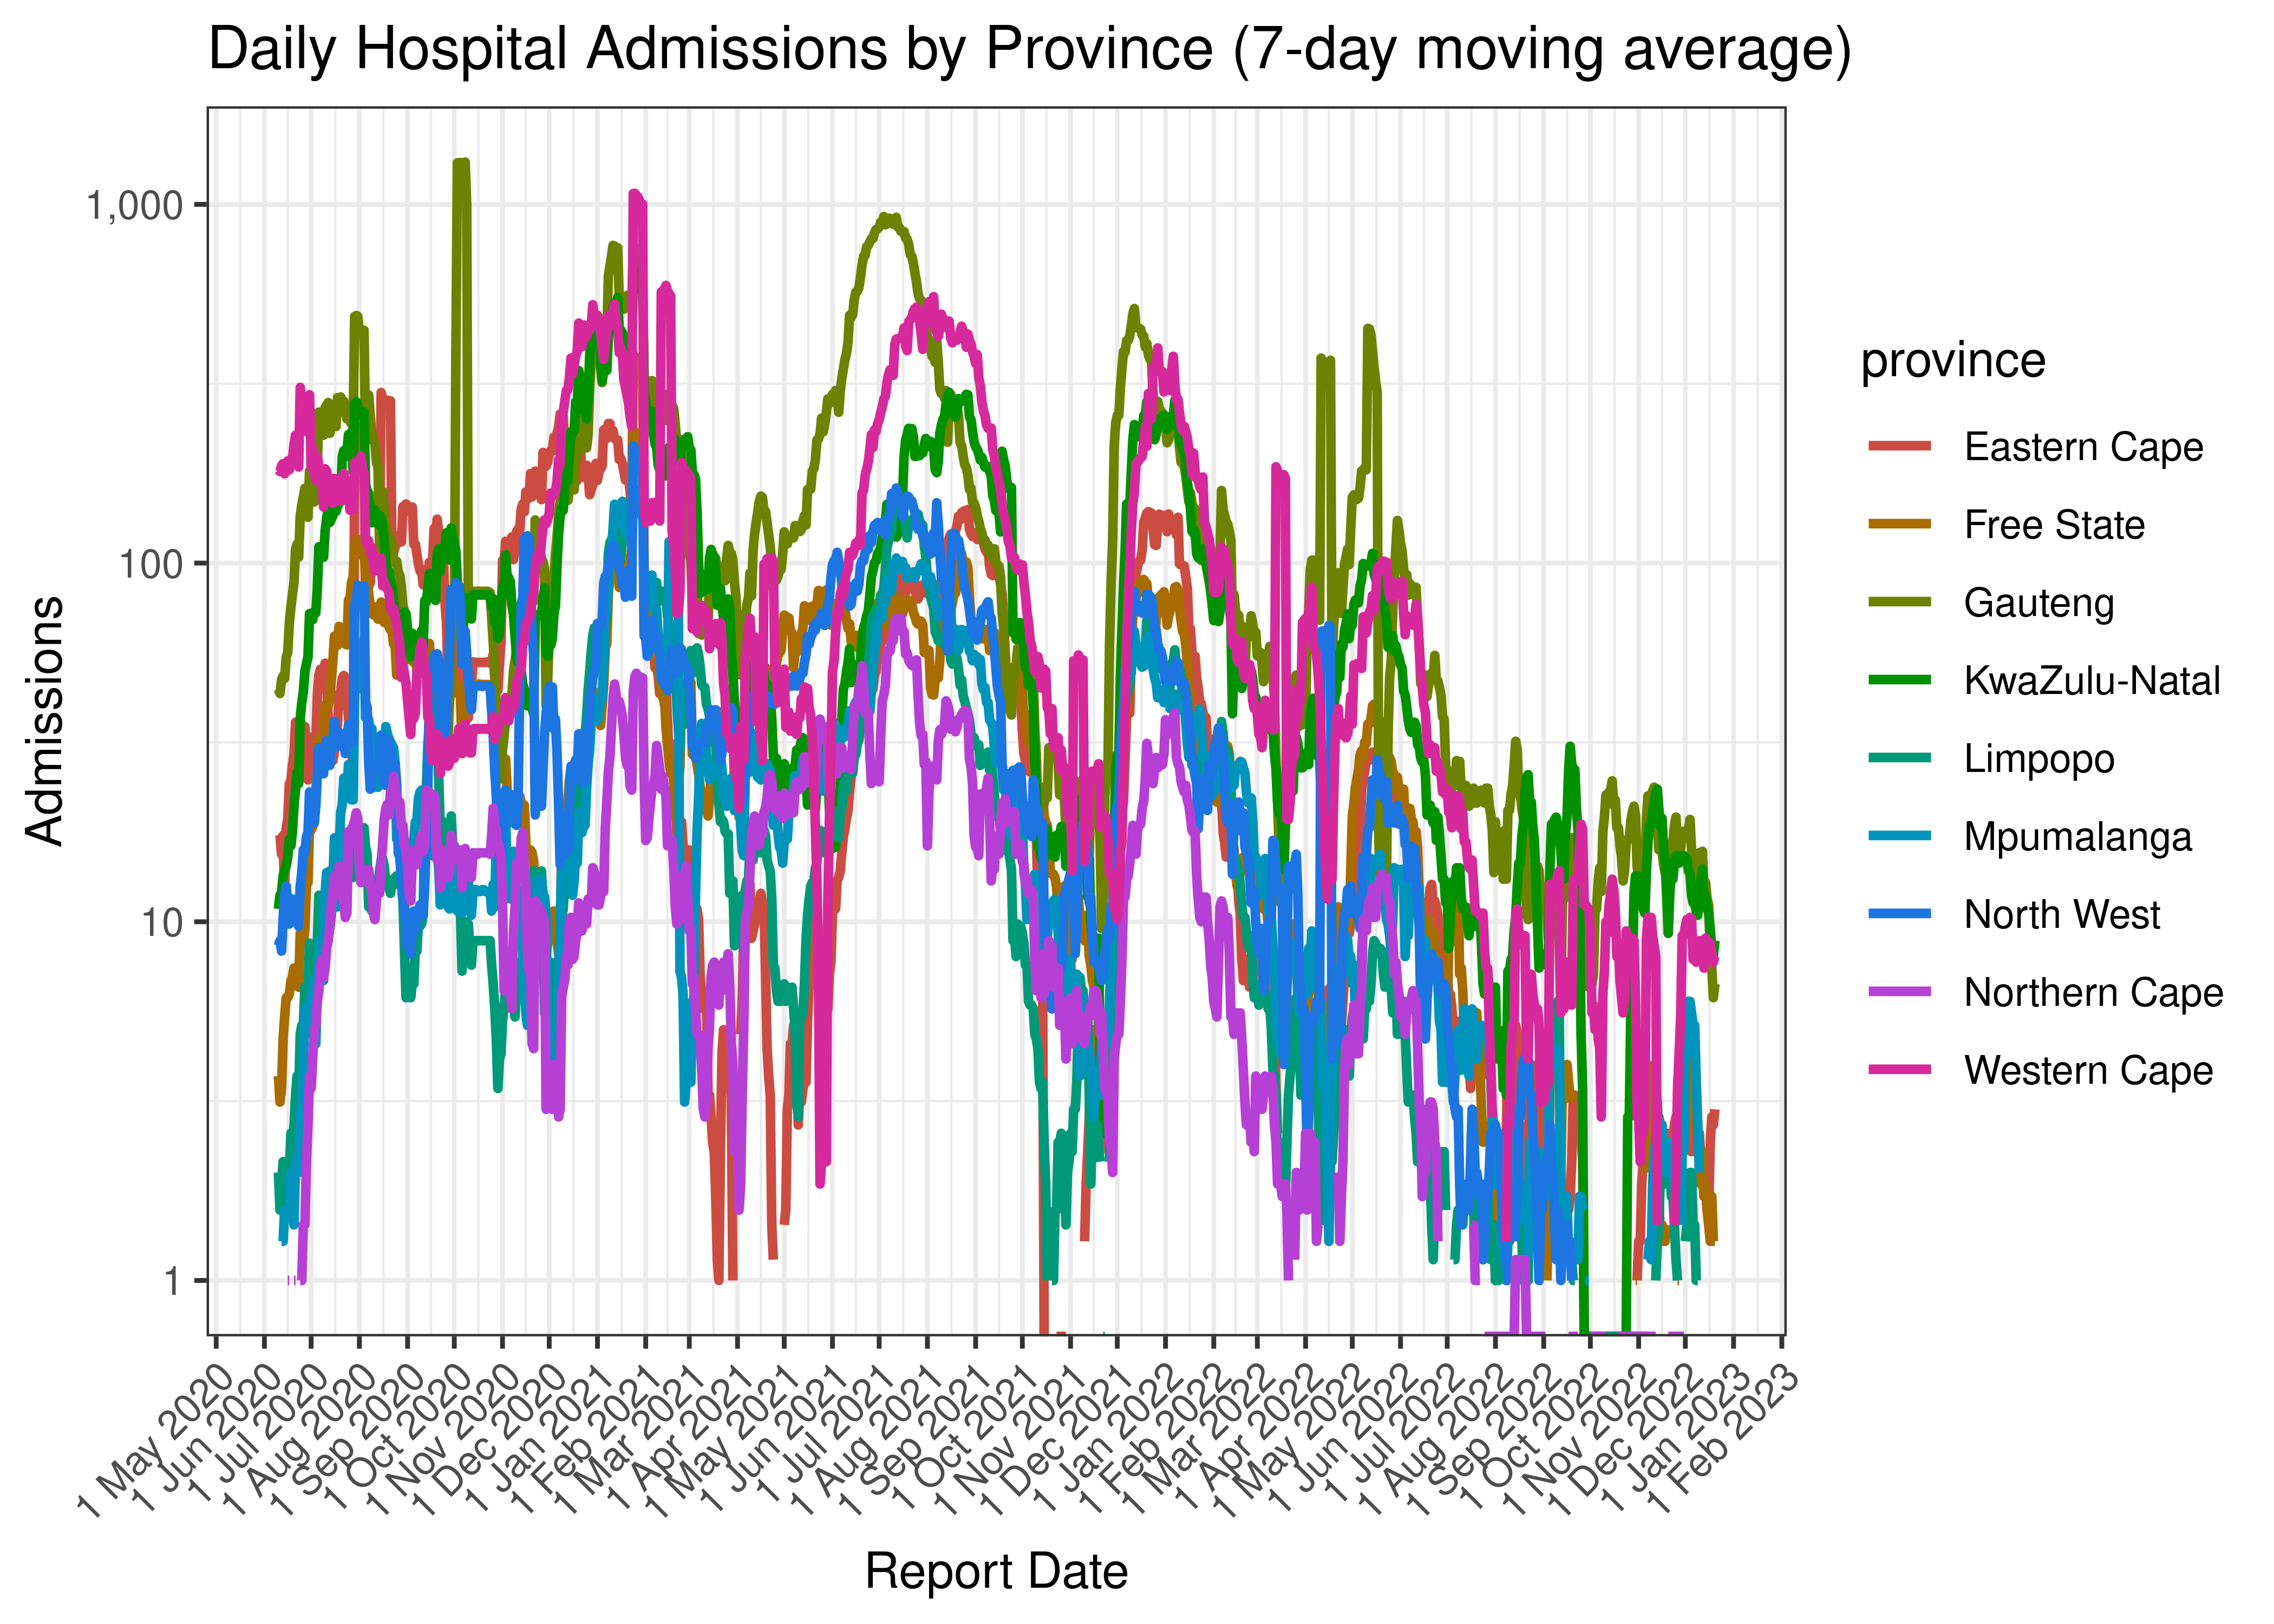 Daily Hospital Admissions by Province (7-day moving average)